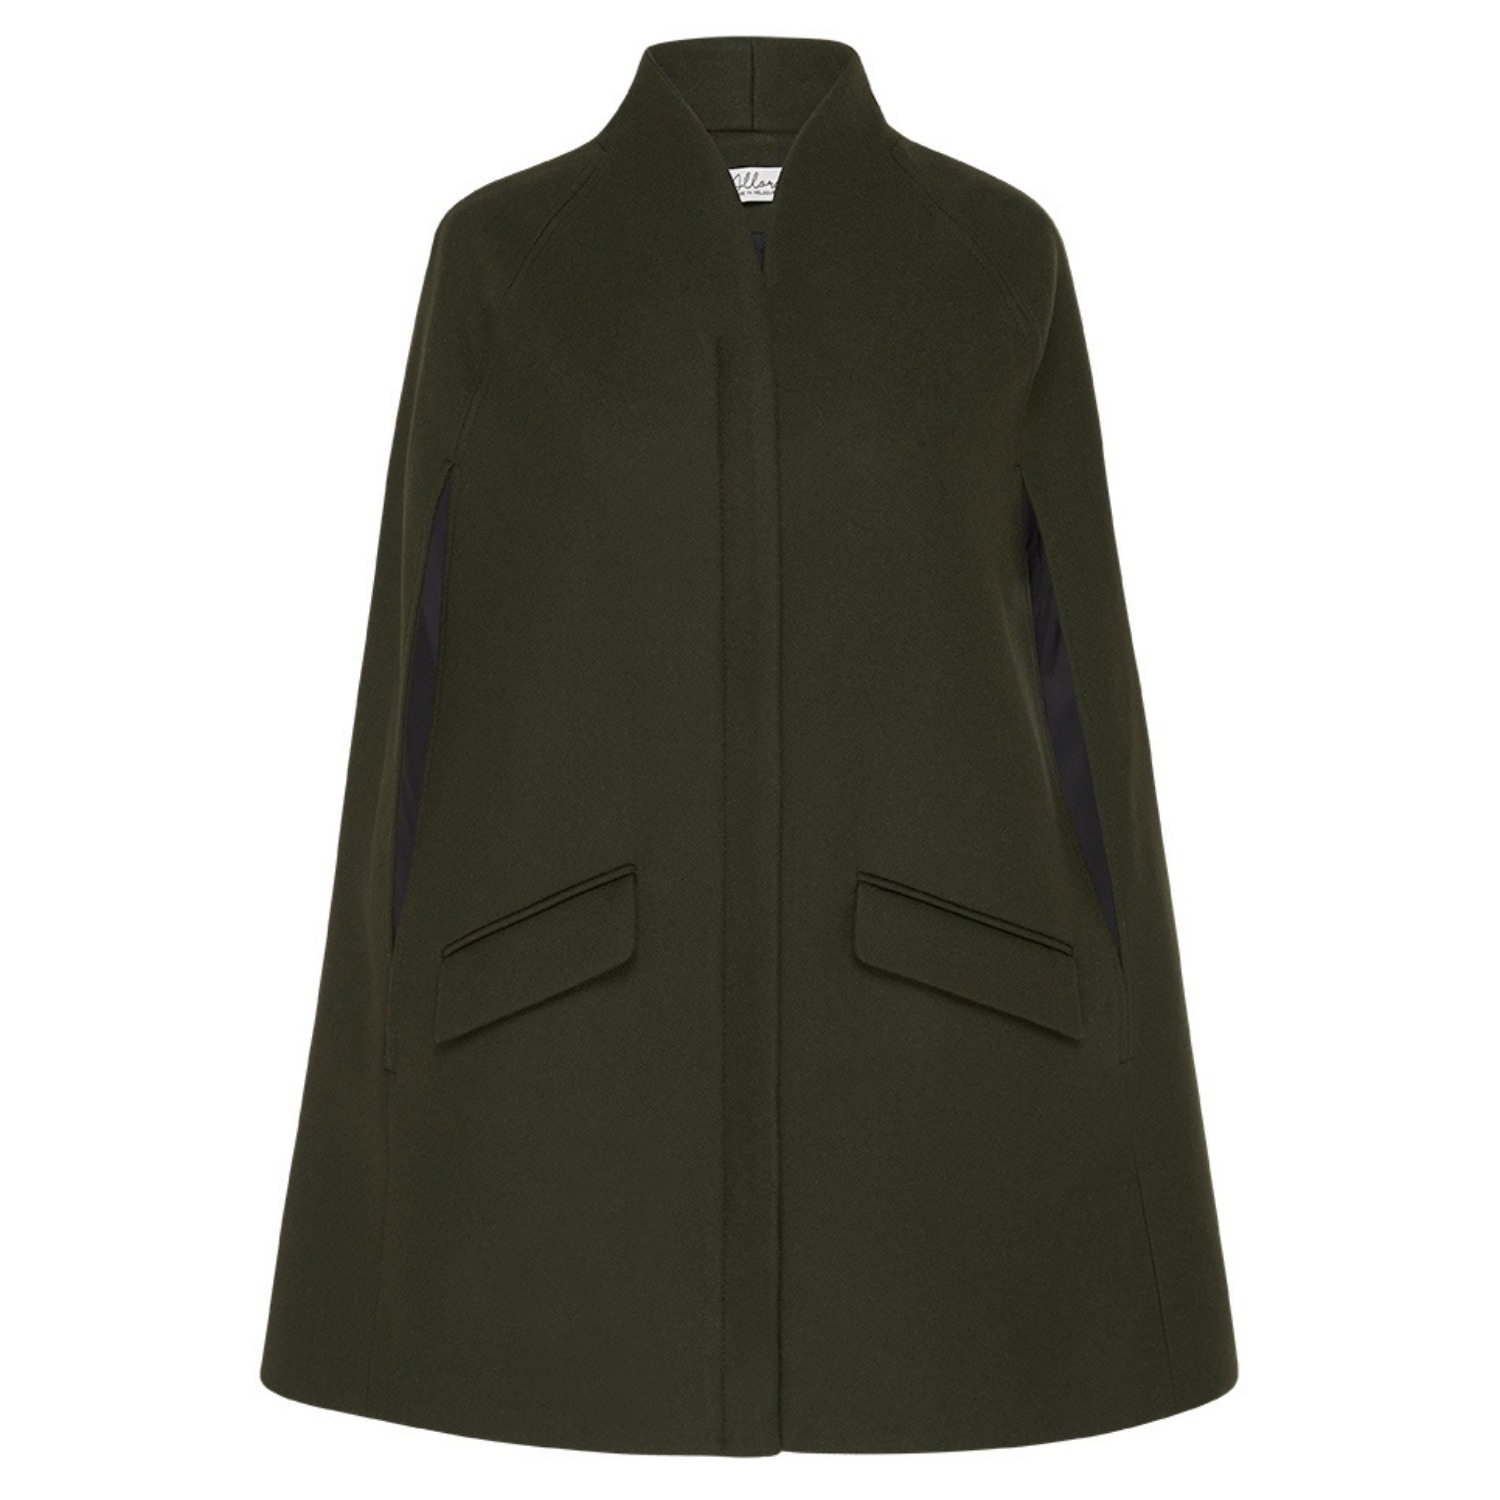 Chelsea Wool Cashmere Cape - Green by Allora